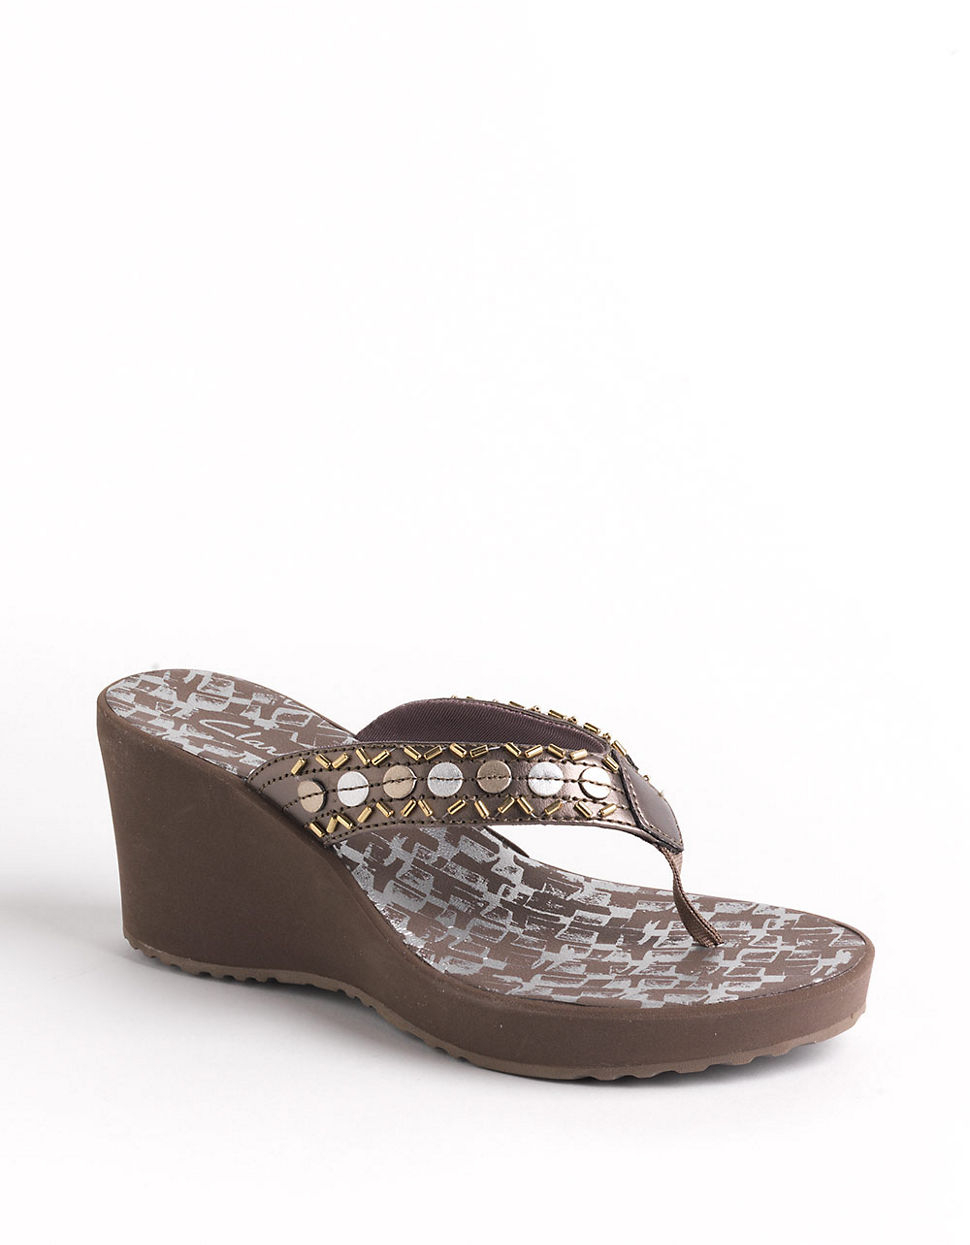 Clarks Yacht Tide Embellished Wedge Thong Sandals in Gray (grey)